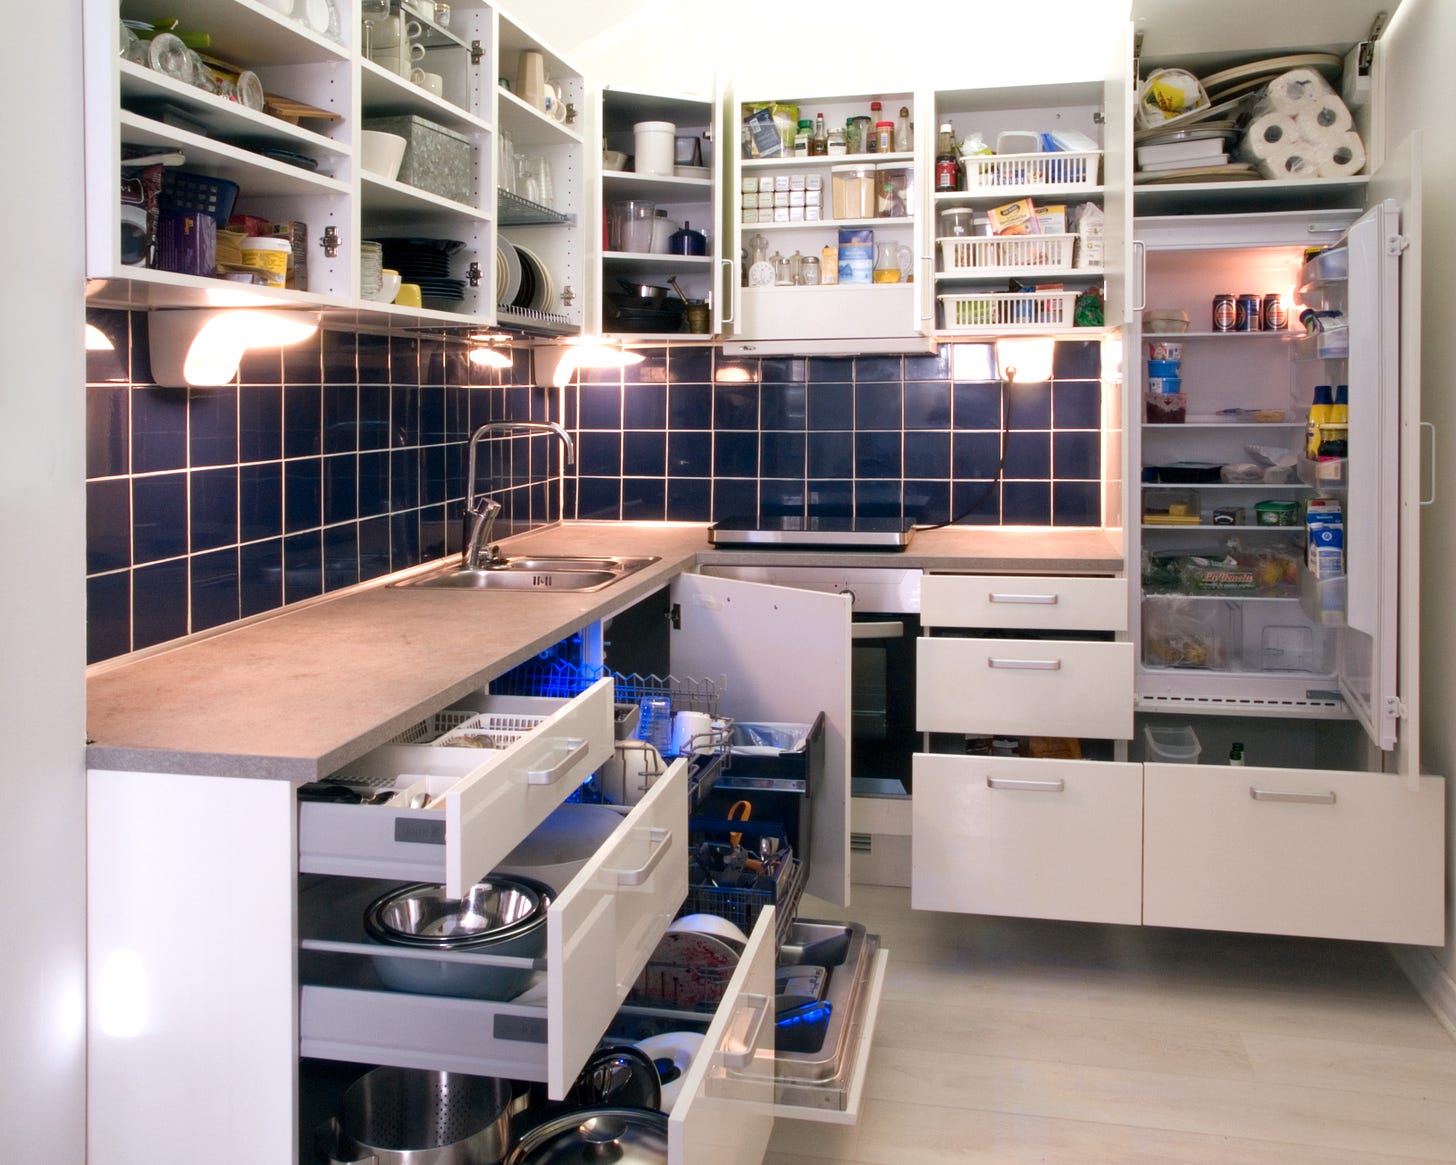 File:White kitchen with cabinet doors and drawers opened or ...